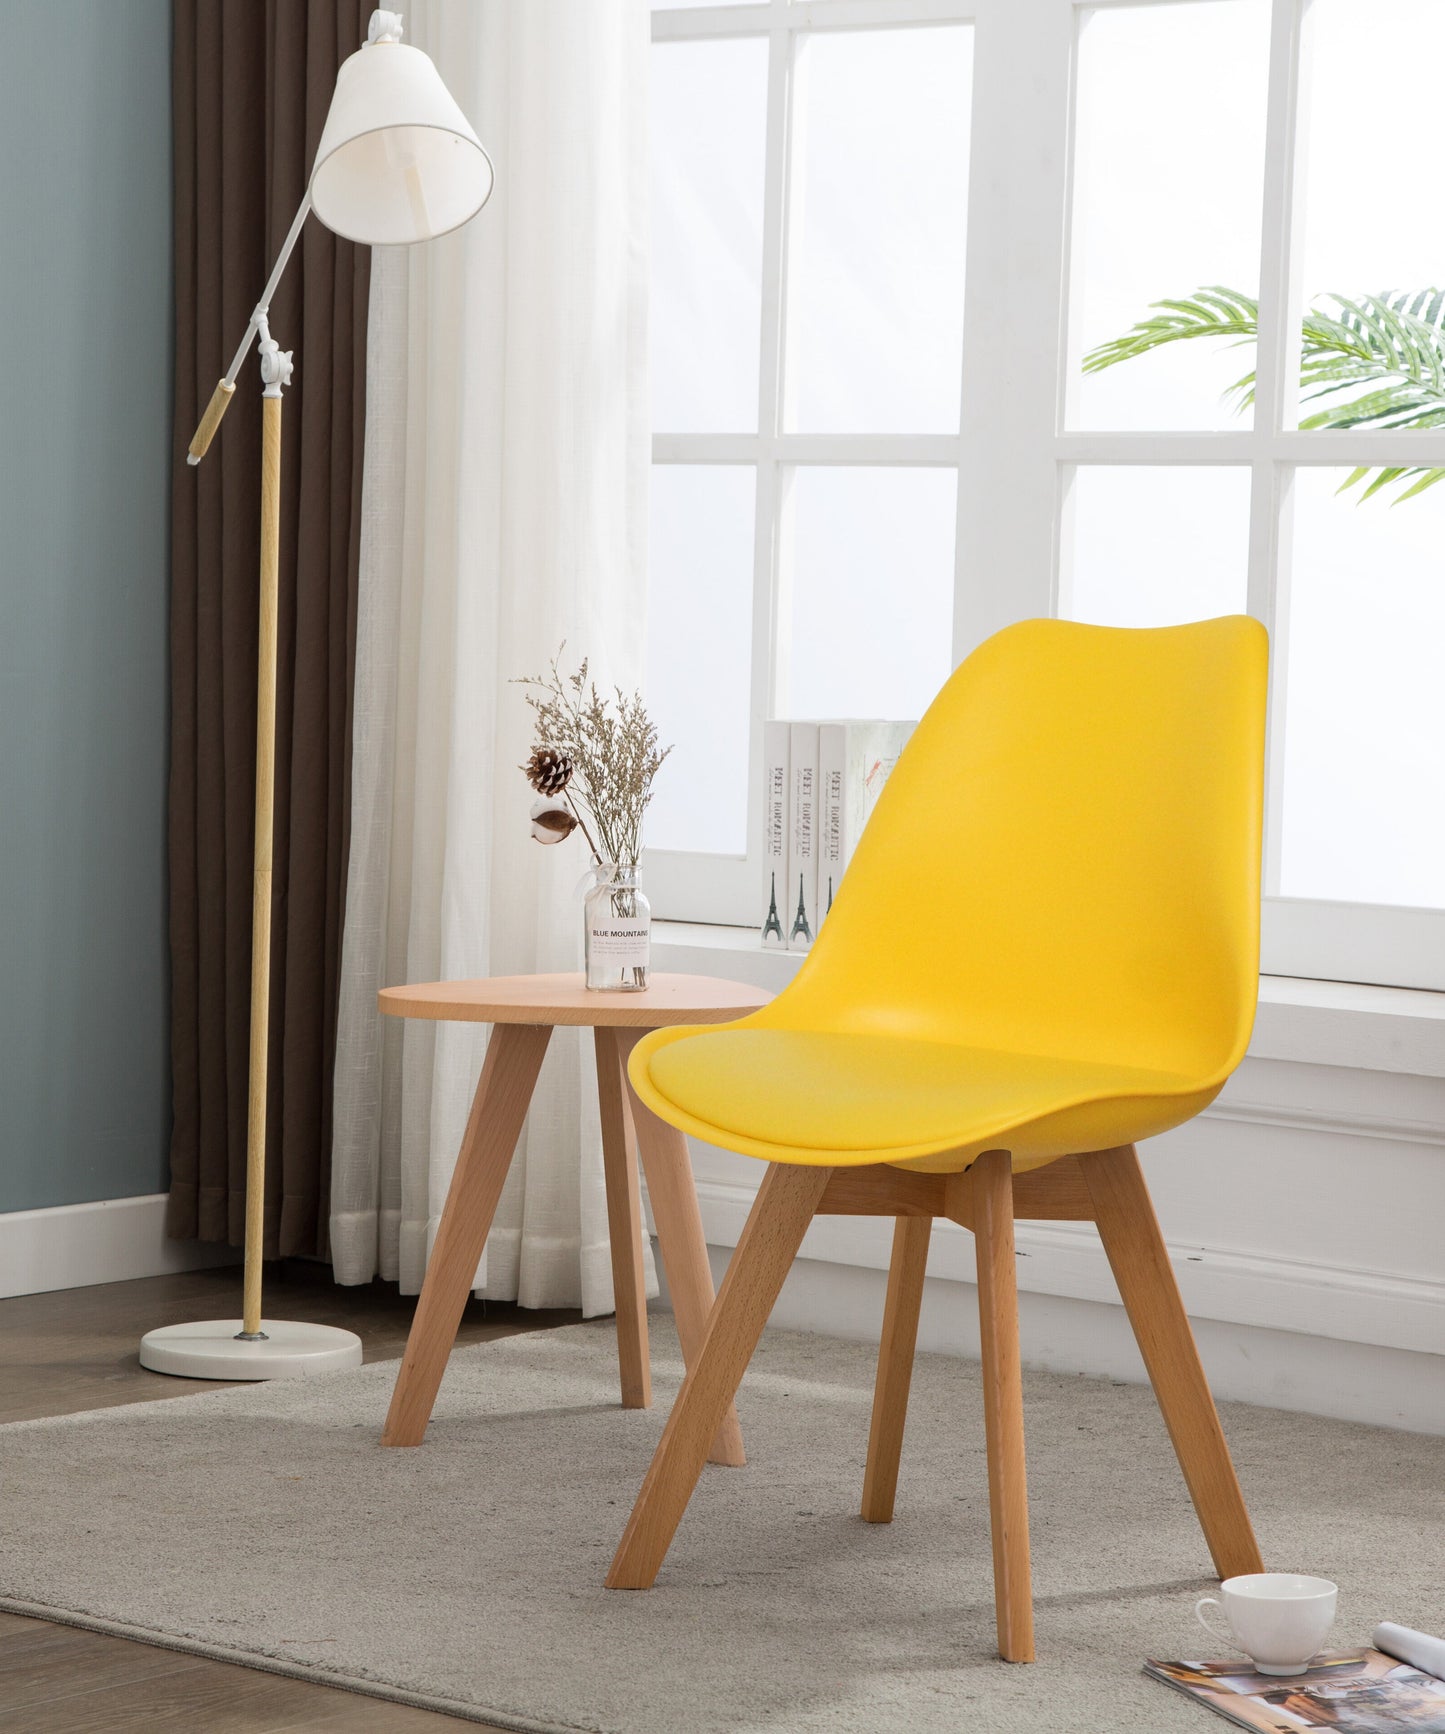 CHOTTO - Ando Dining Chairs - Yellow x 4